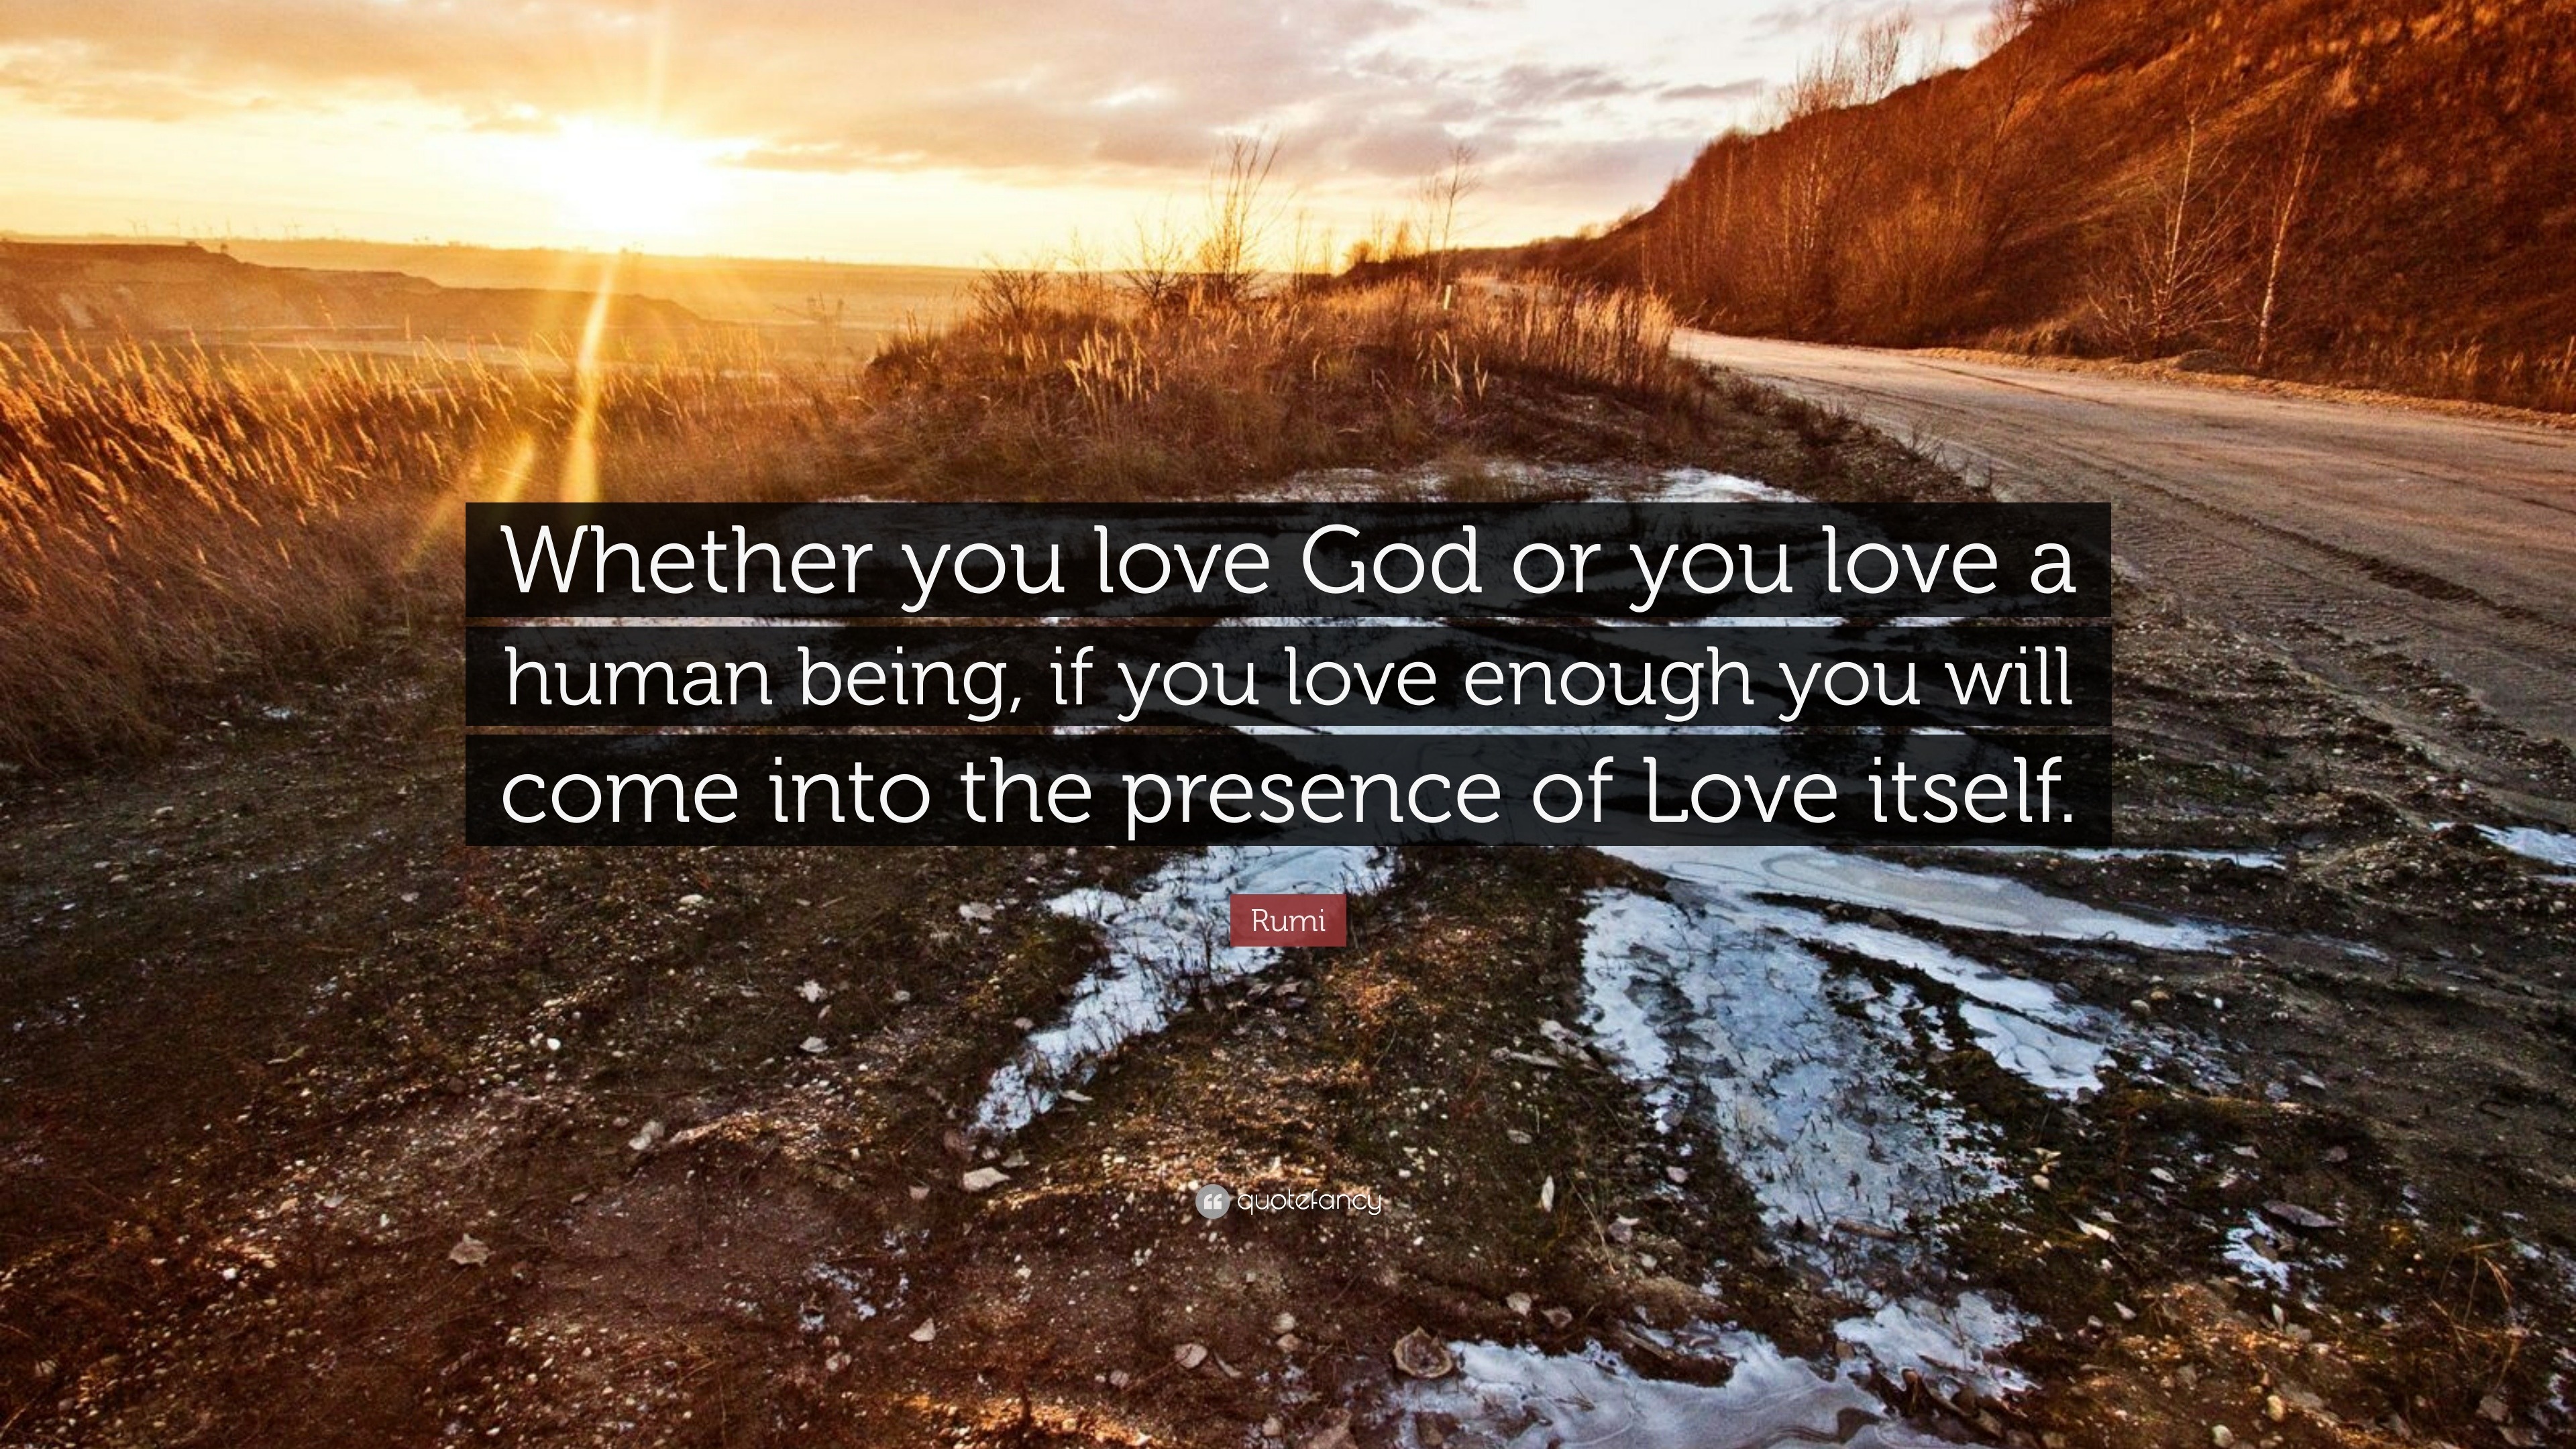 Rumi Quote “Whether you love God or you love a human being if